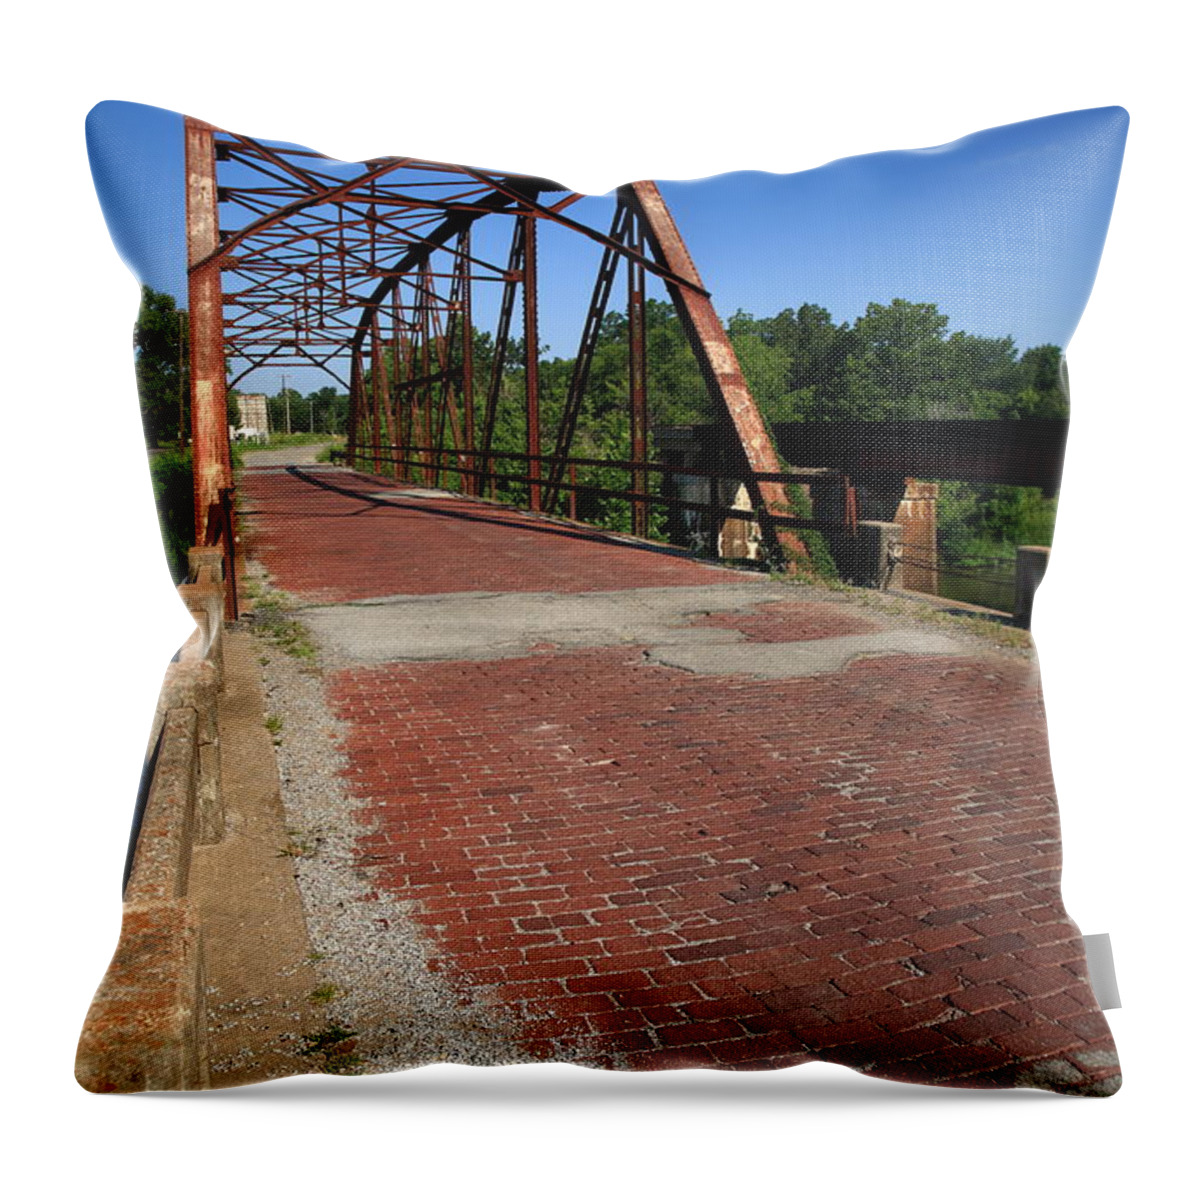 66 Throw Pillow featuring the photograph Route 66 - One Lane Bridge 2012 by Frank Romeo